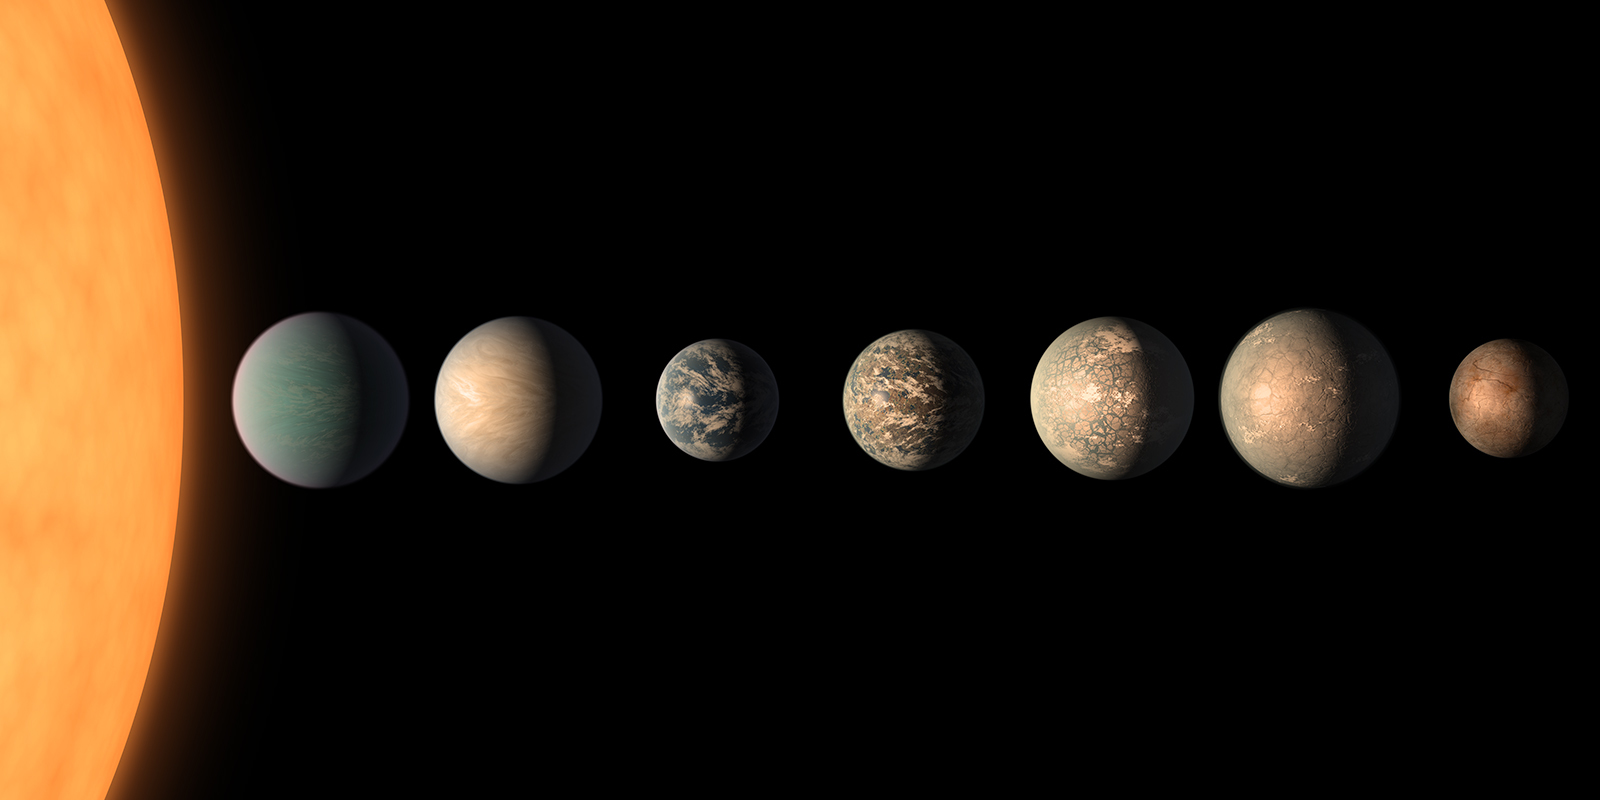 An image showing the exoplanets of the TRAPPIST-1 planetary system based on NASA Spitzer data.